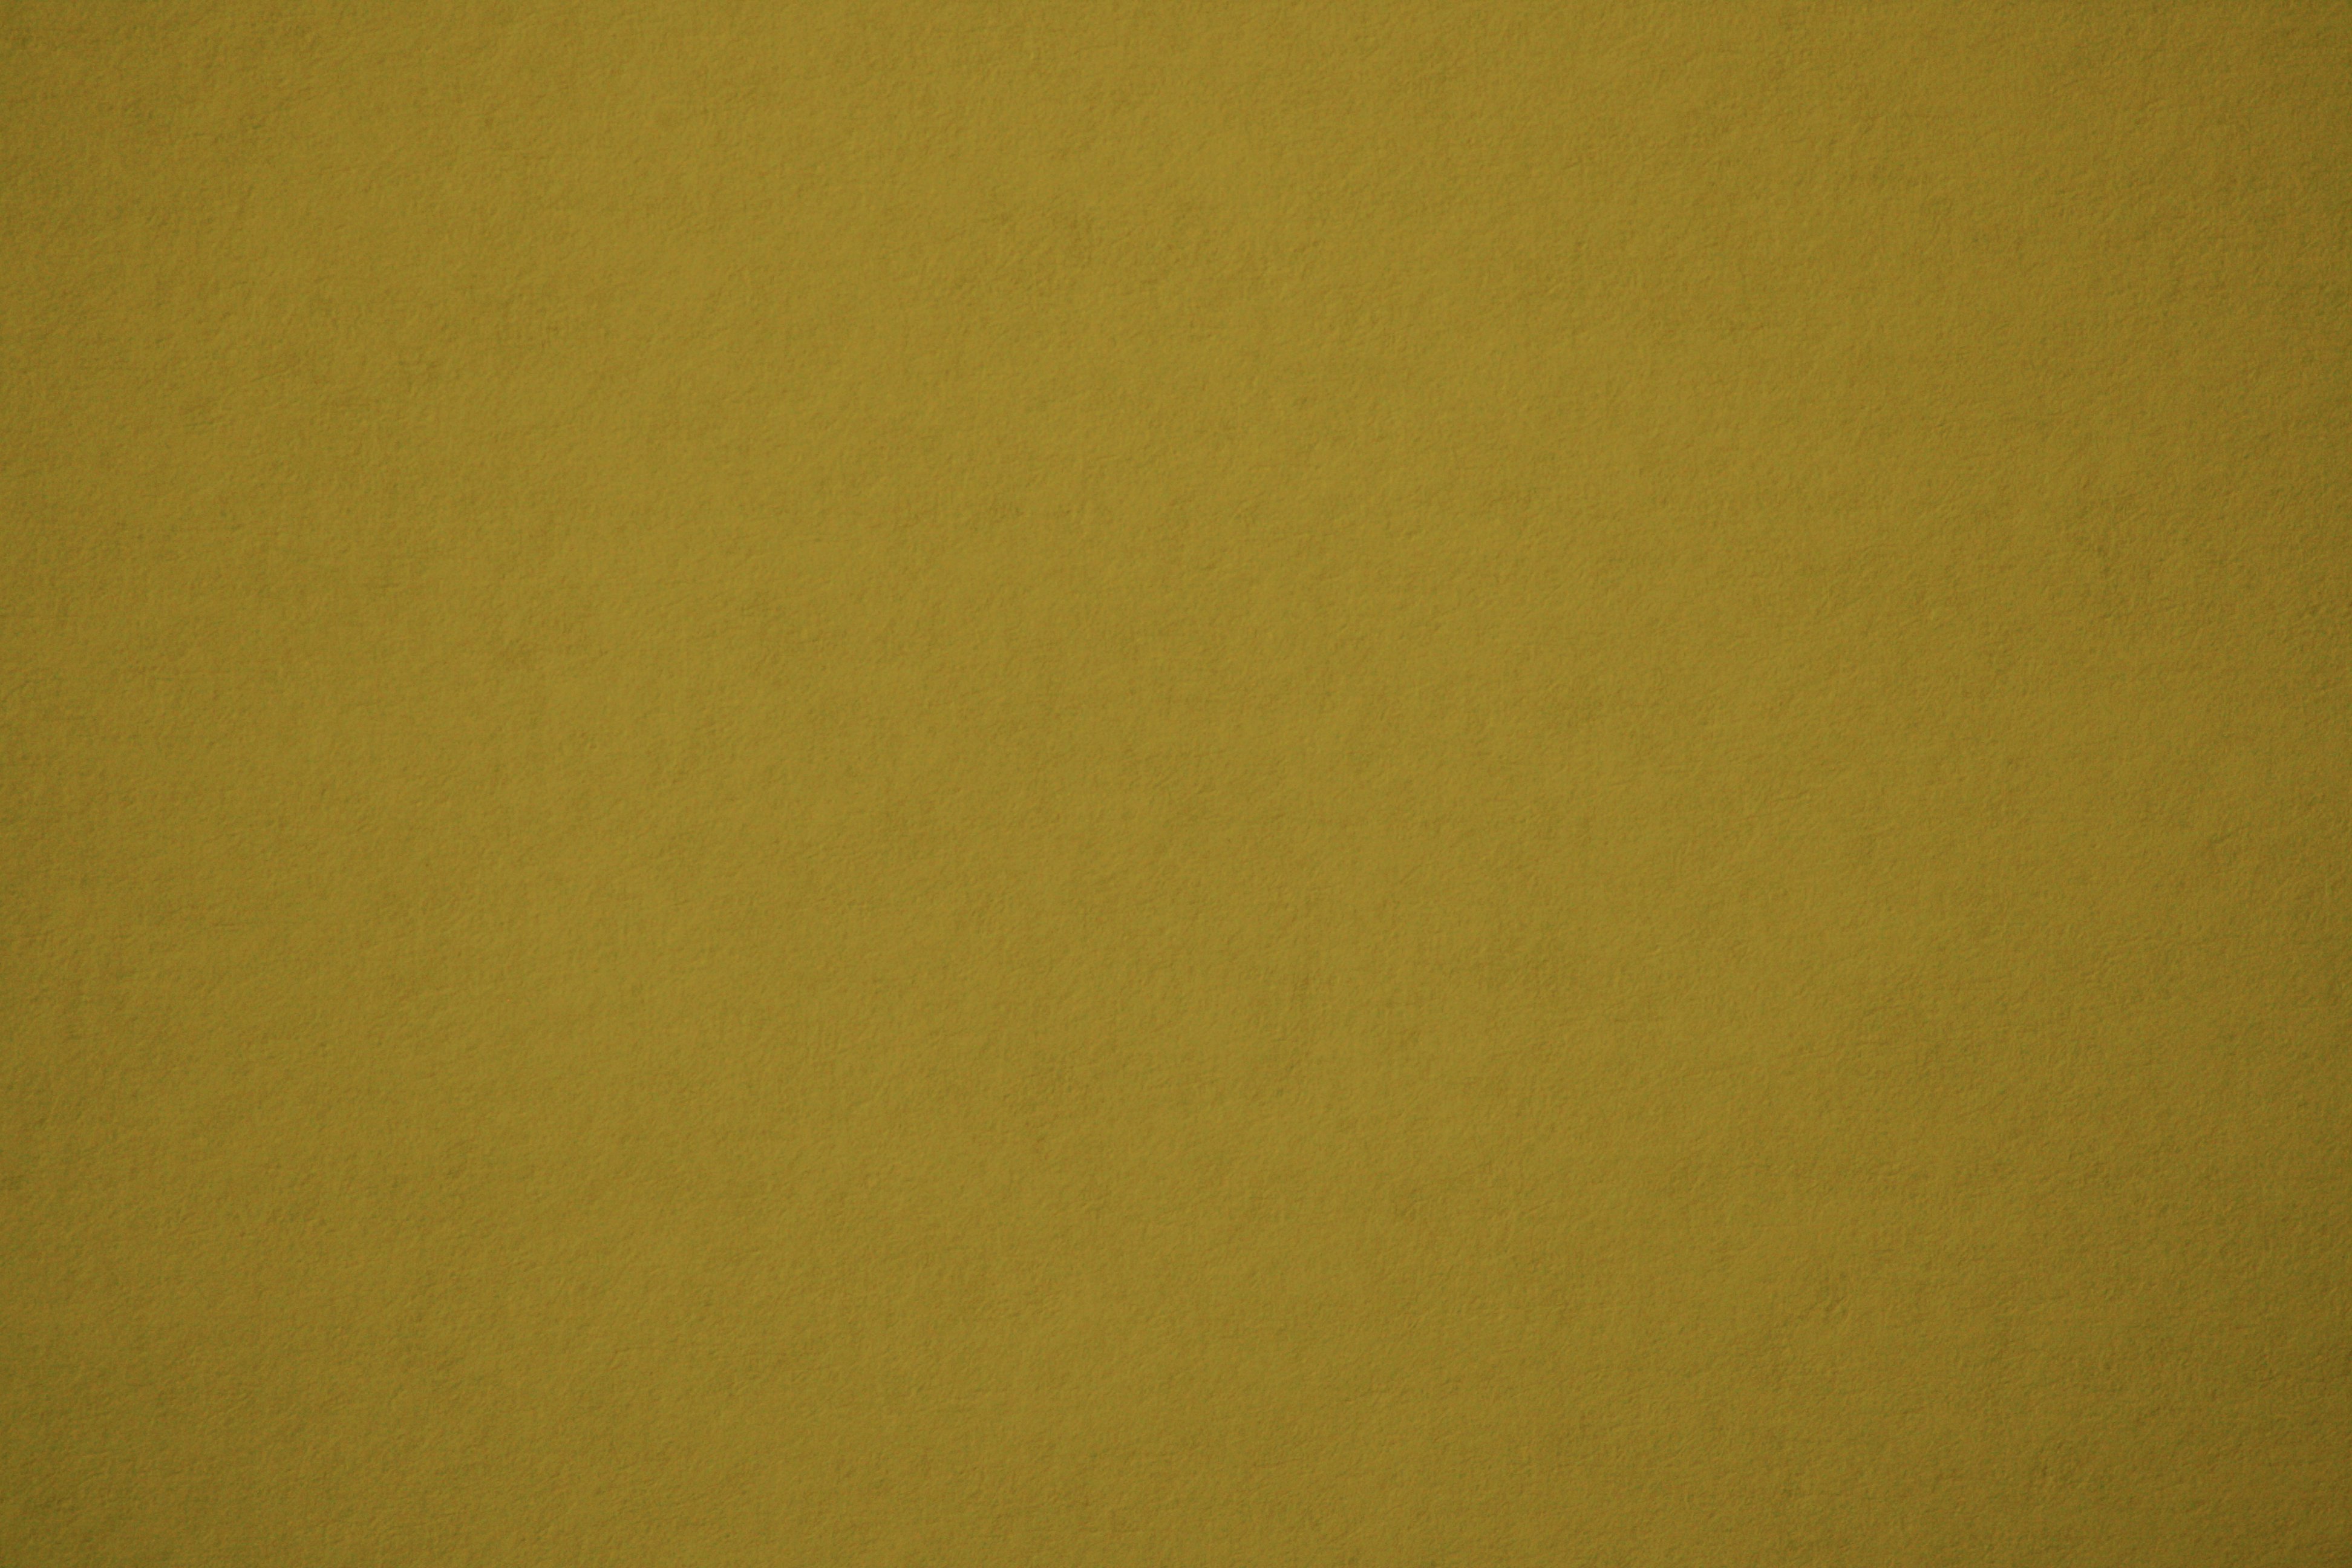 Gold Paper Texture Picture, Free Photograph